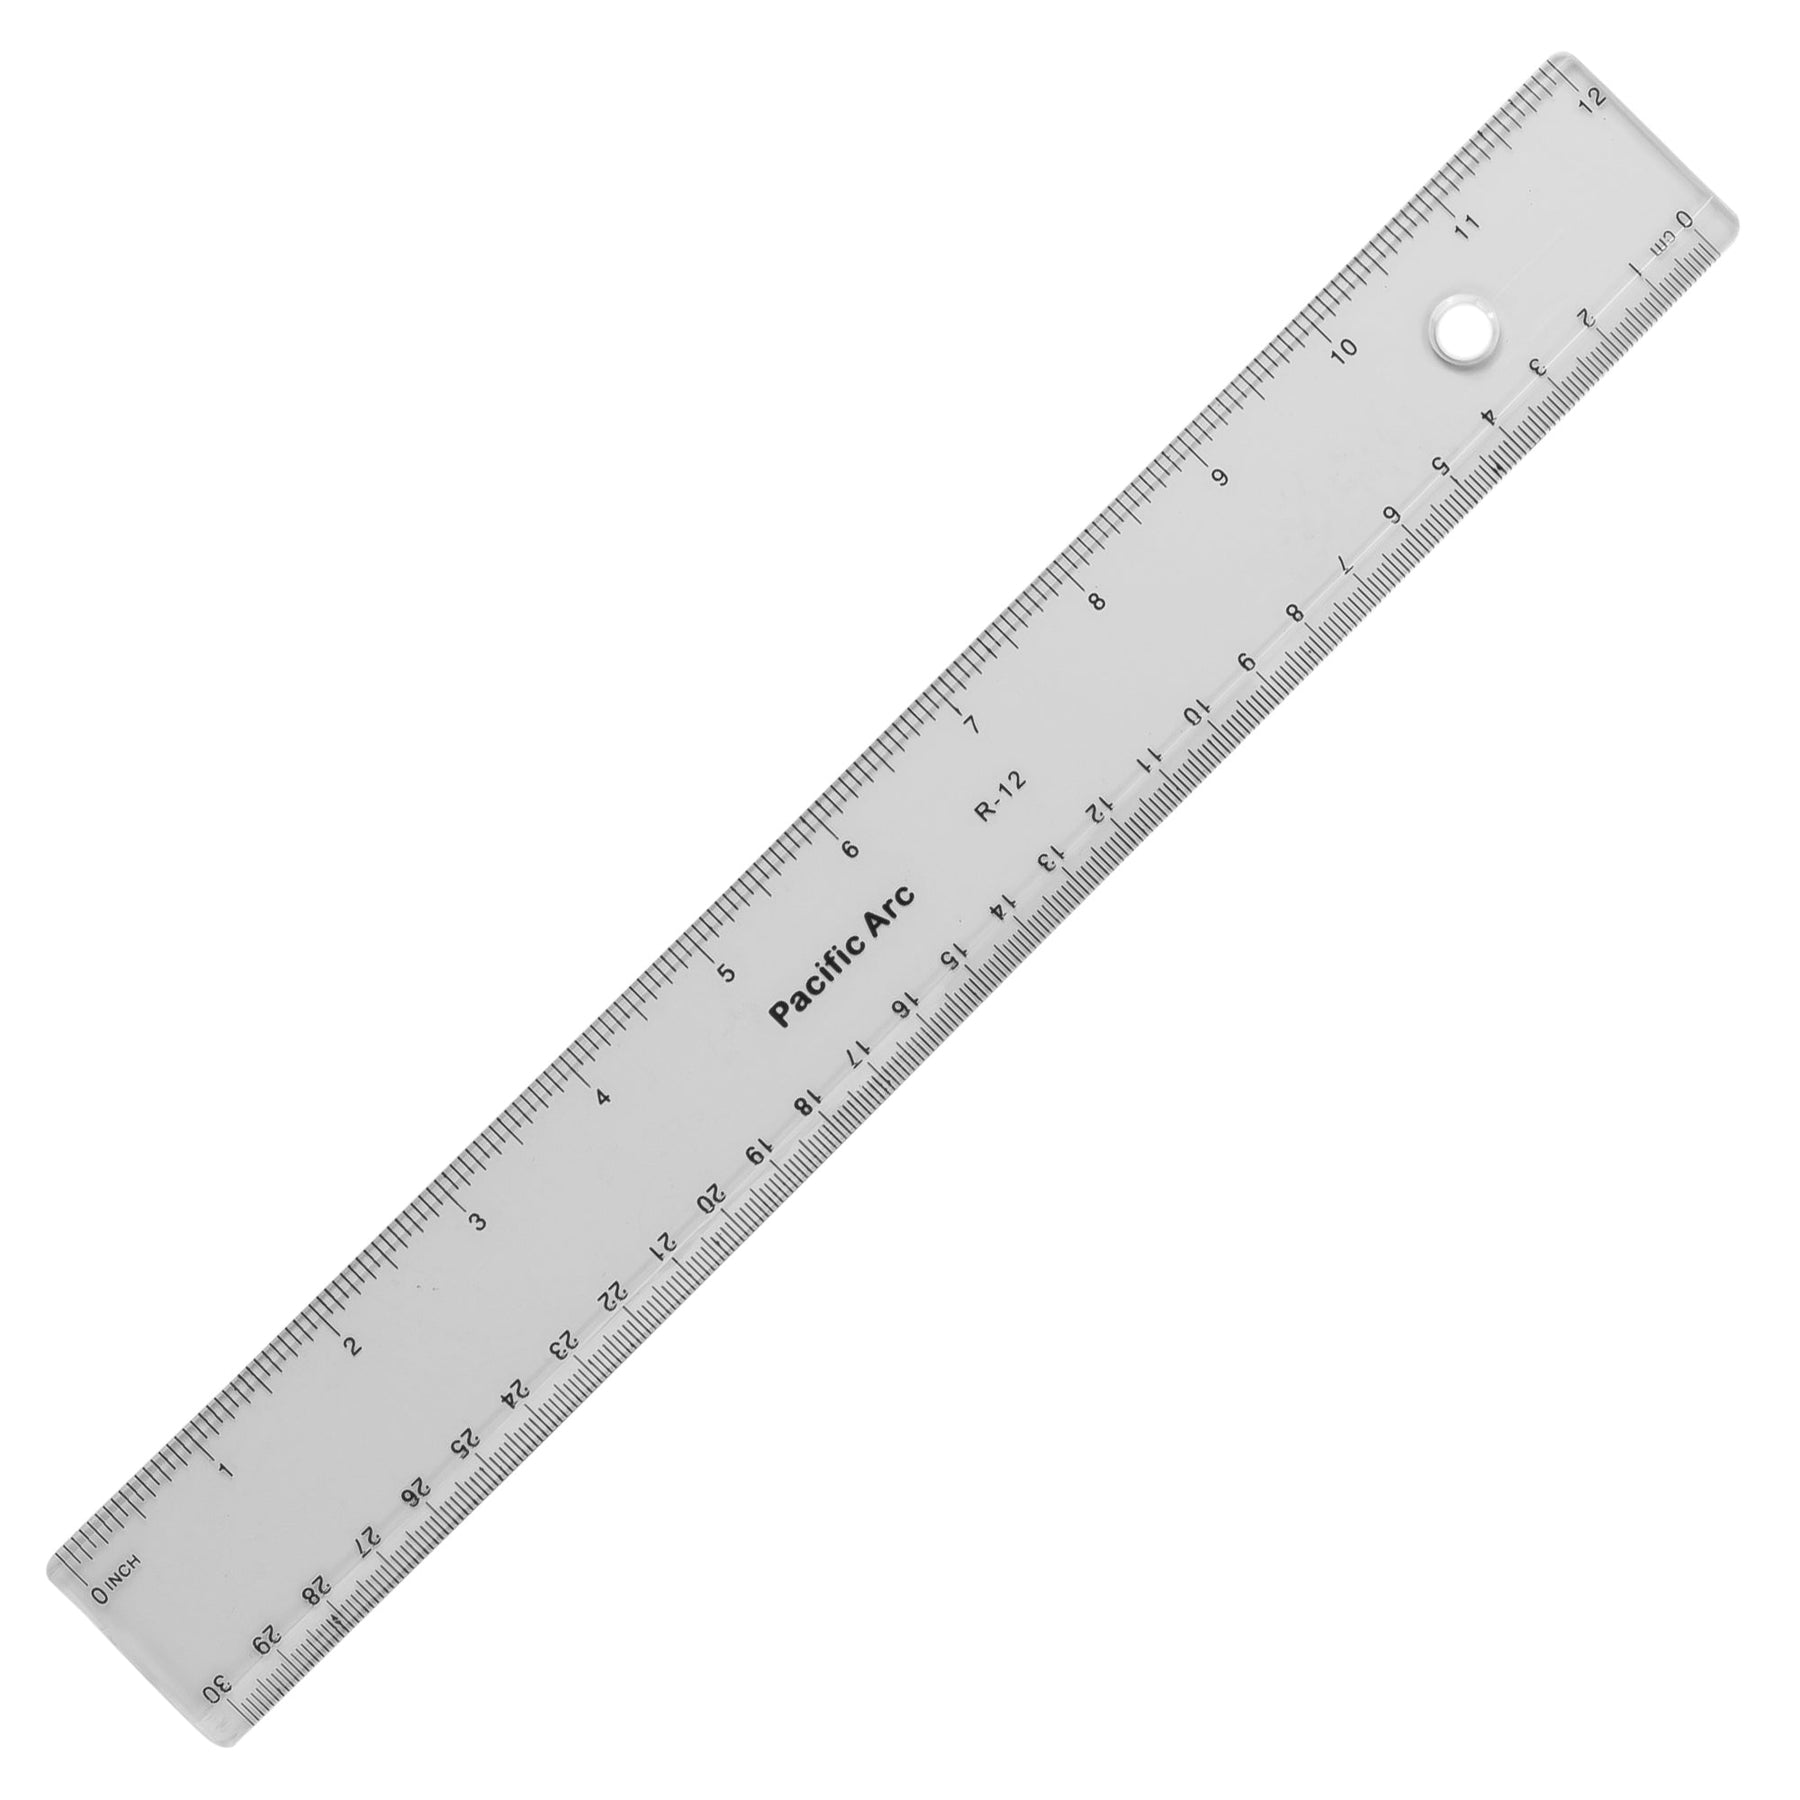 rulers with centimeters